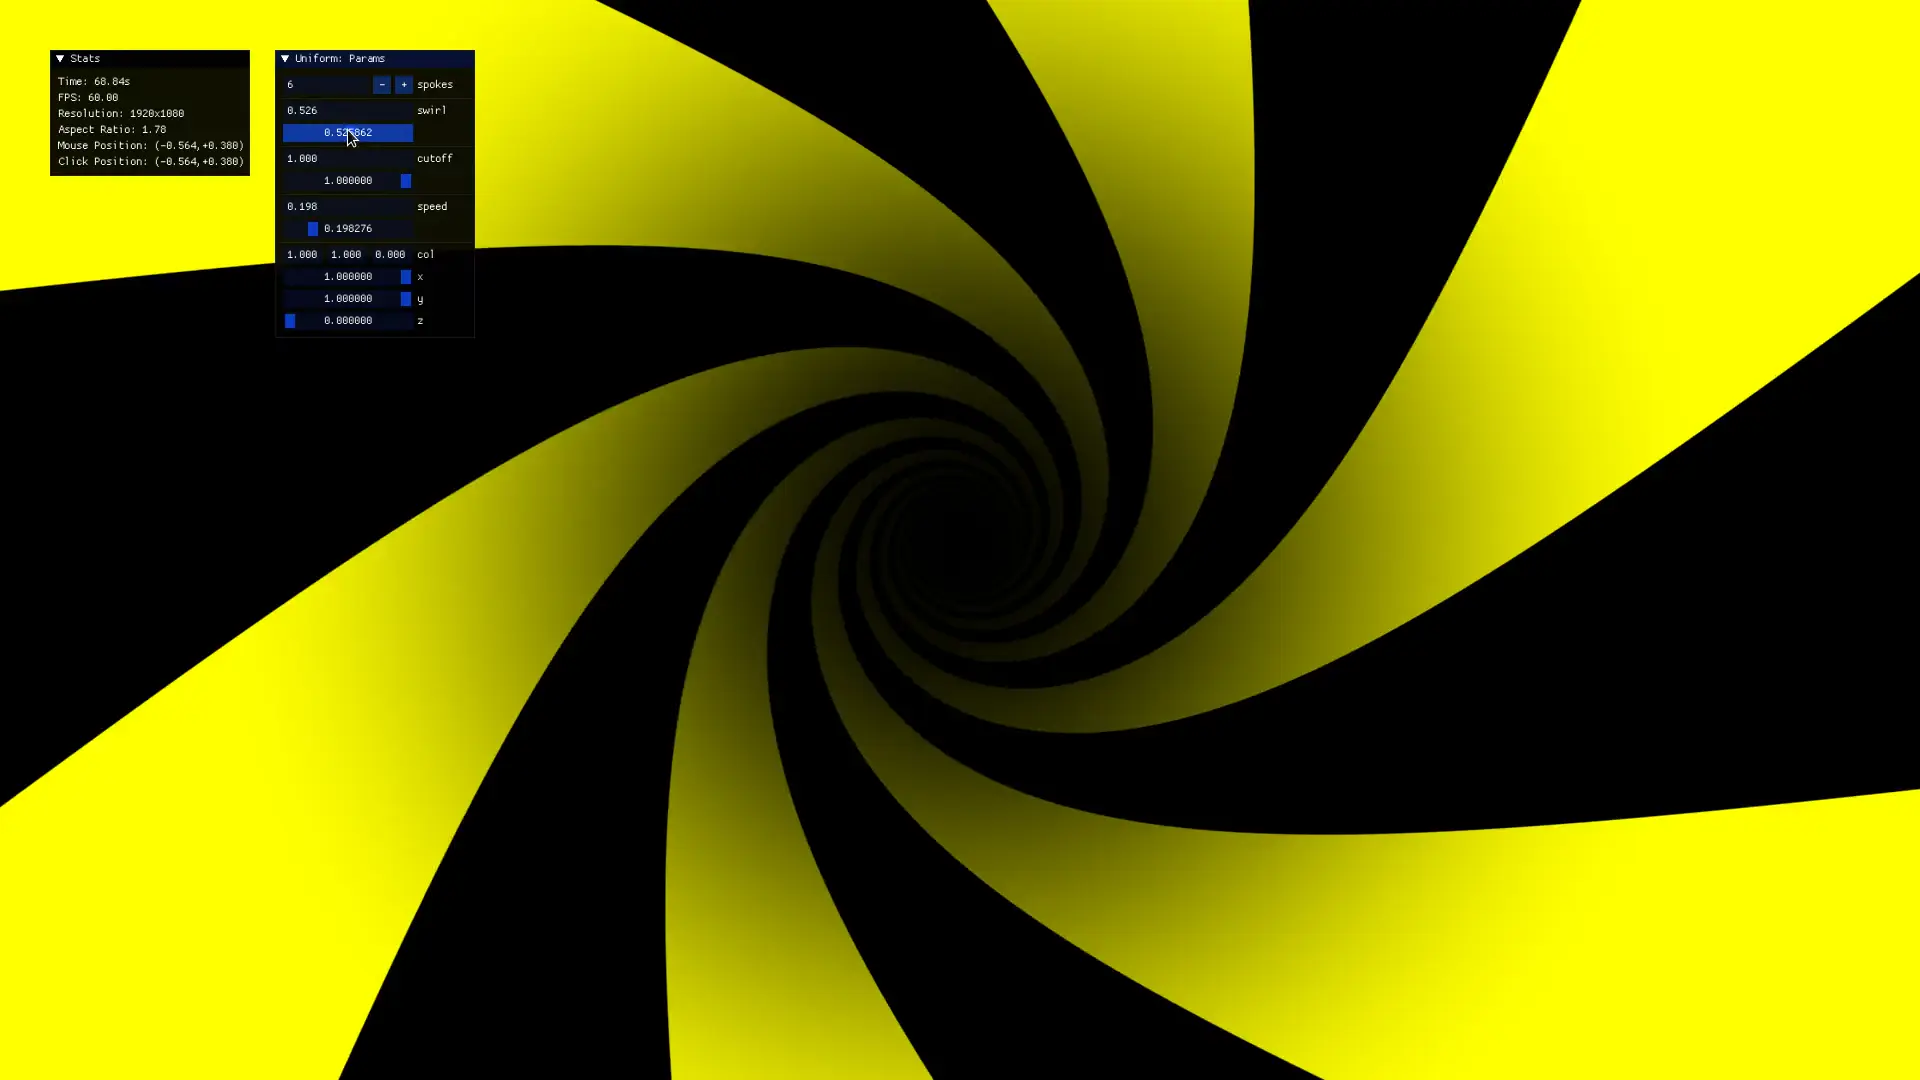 Rotating black and yellow spiral tunnel shader with tweaking of parameters.